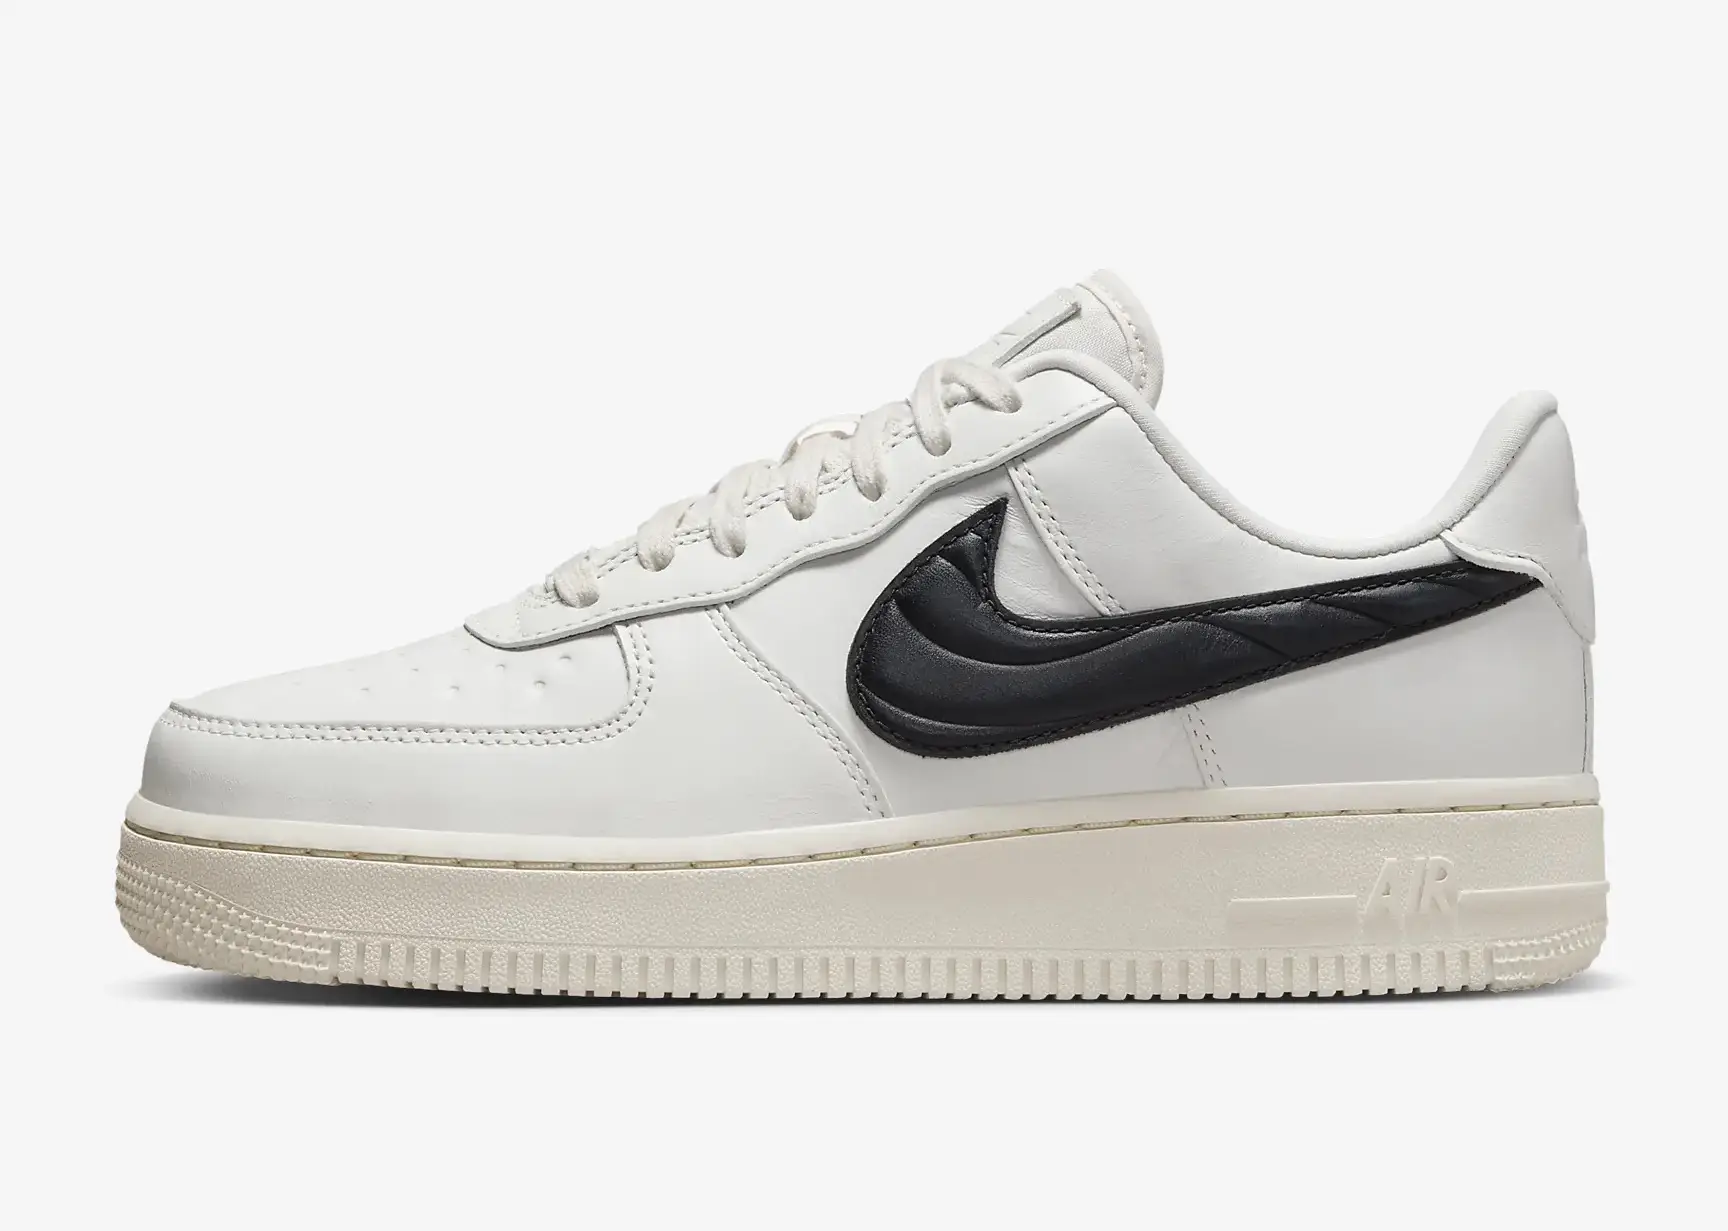 Nike Air Force 1 Sizing: Does the Air Force 1 Fit True to Size